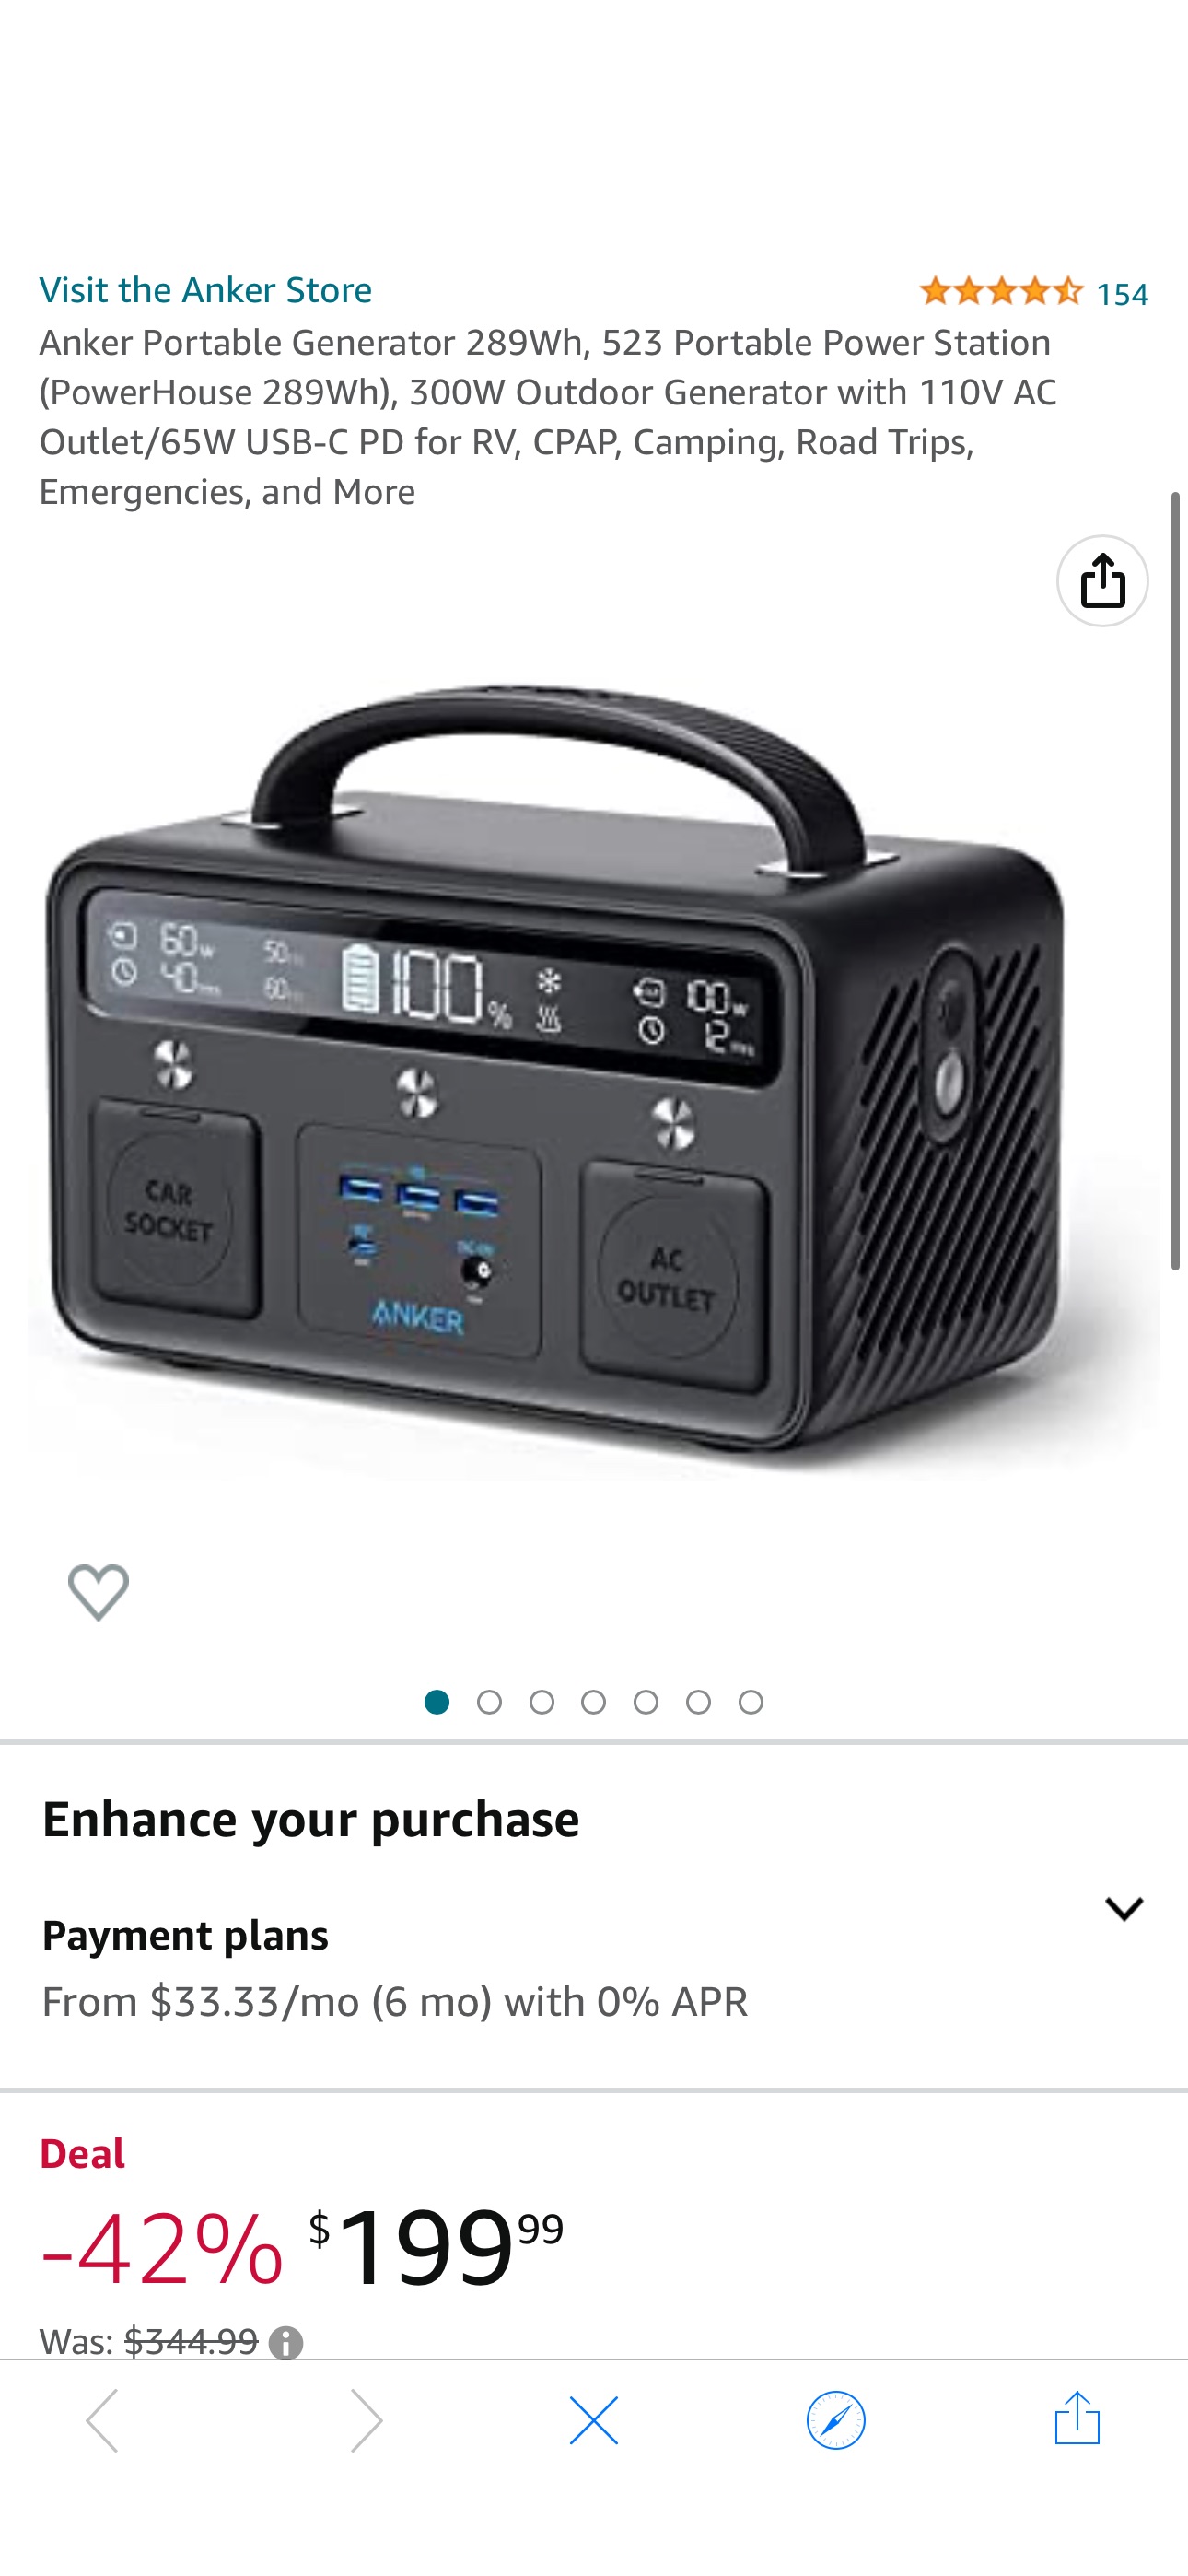 Amazon.com: Anker Portable Generator 289Wh, 523 Portable Power Station (PowerHouse 289Wh), 300W Outdoor Generator with 110V AC Outlet/65W USB-C PD for RV, CPAP, Camping, Road Trips,